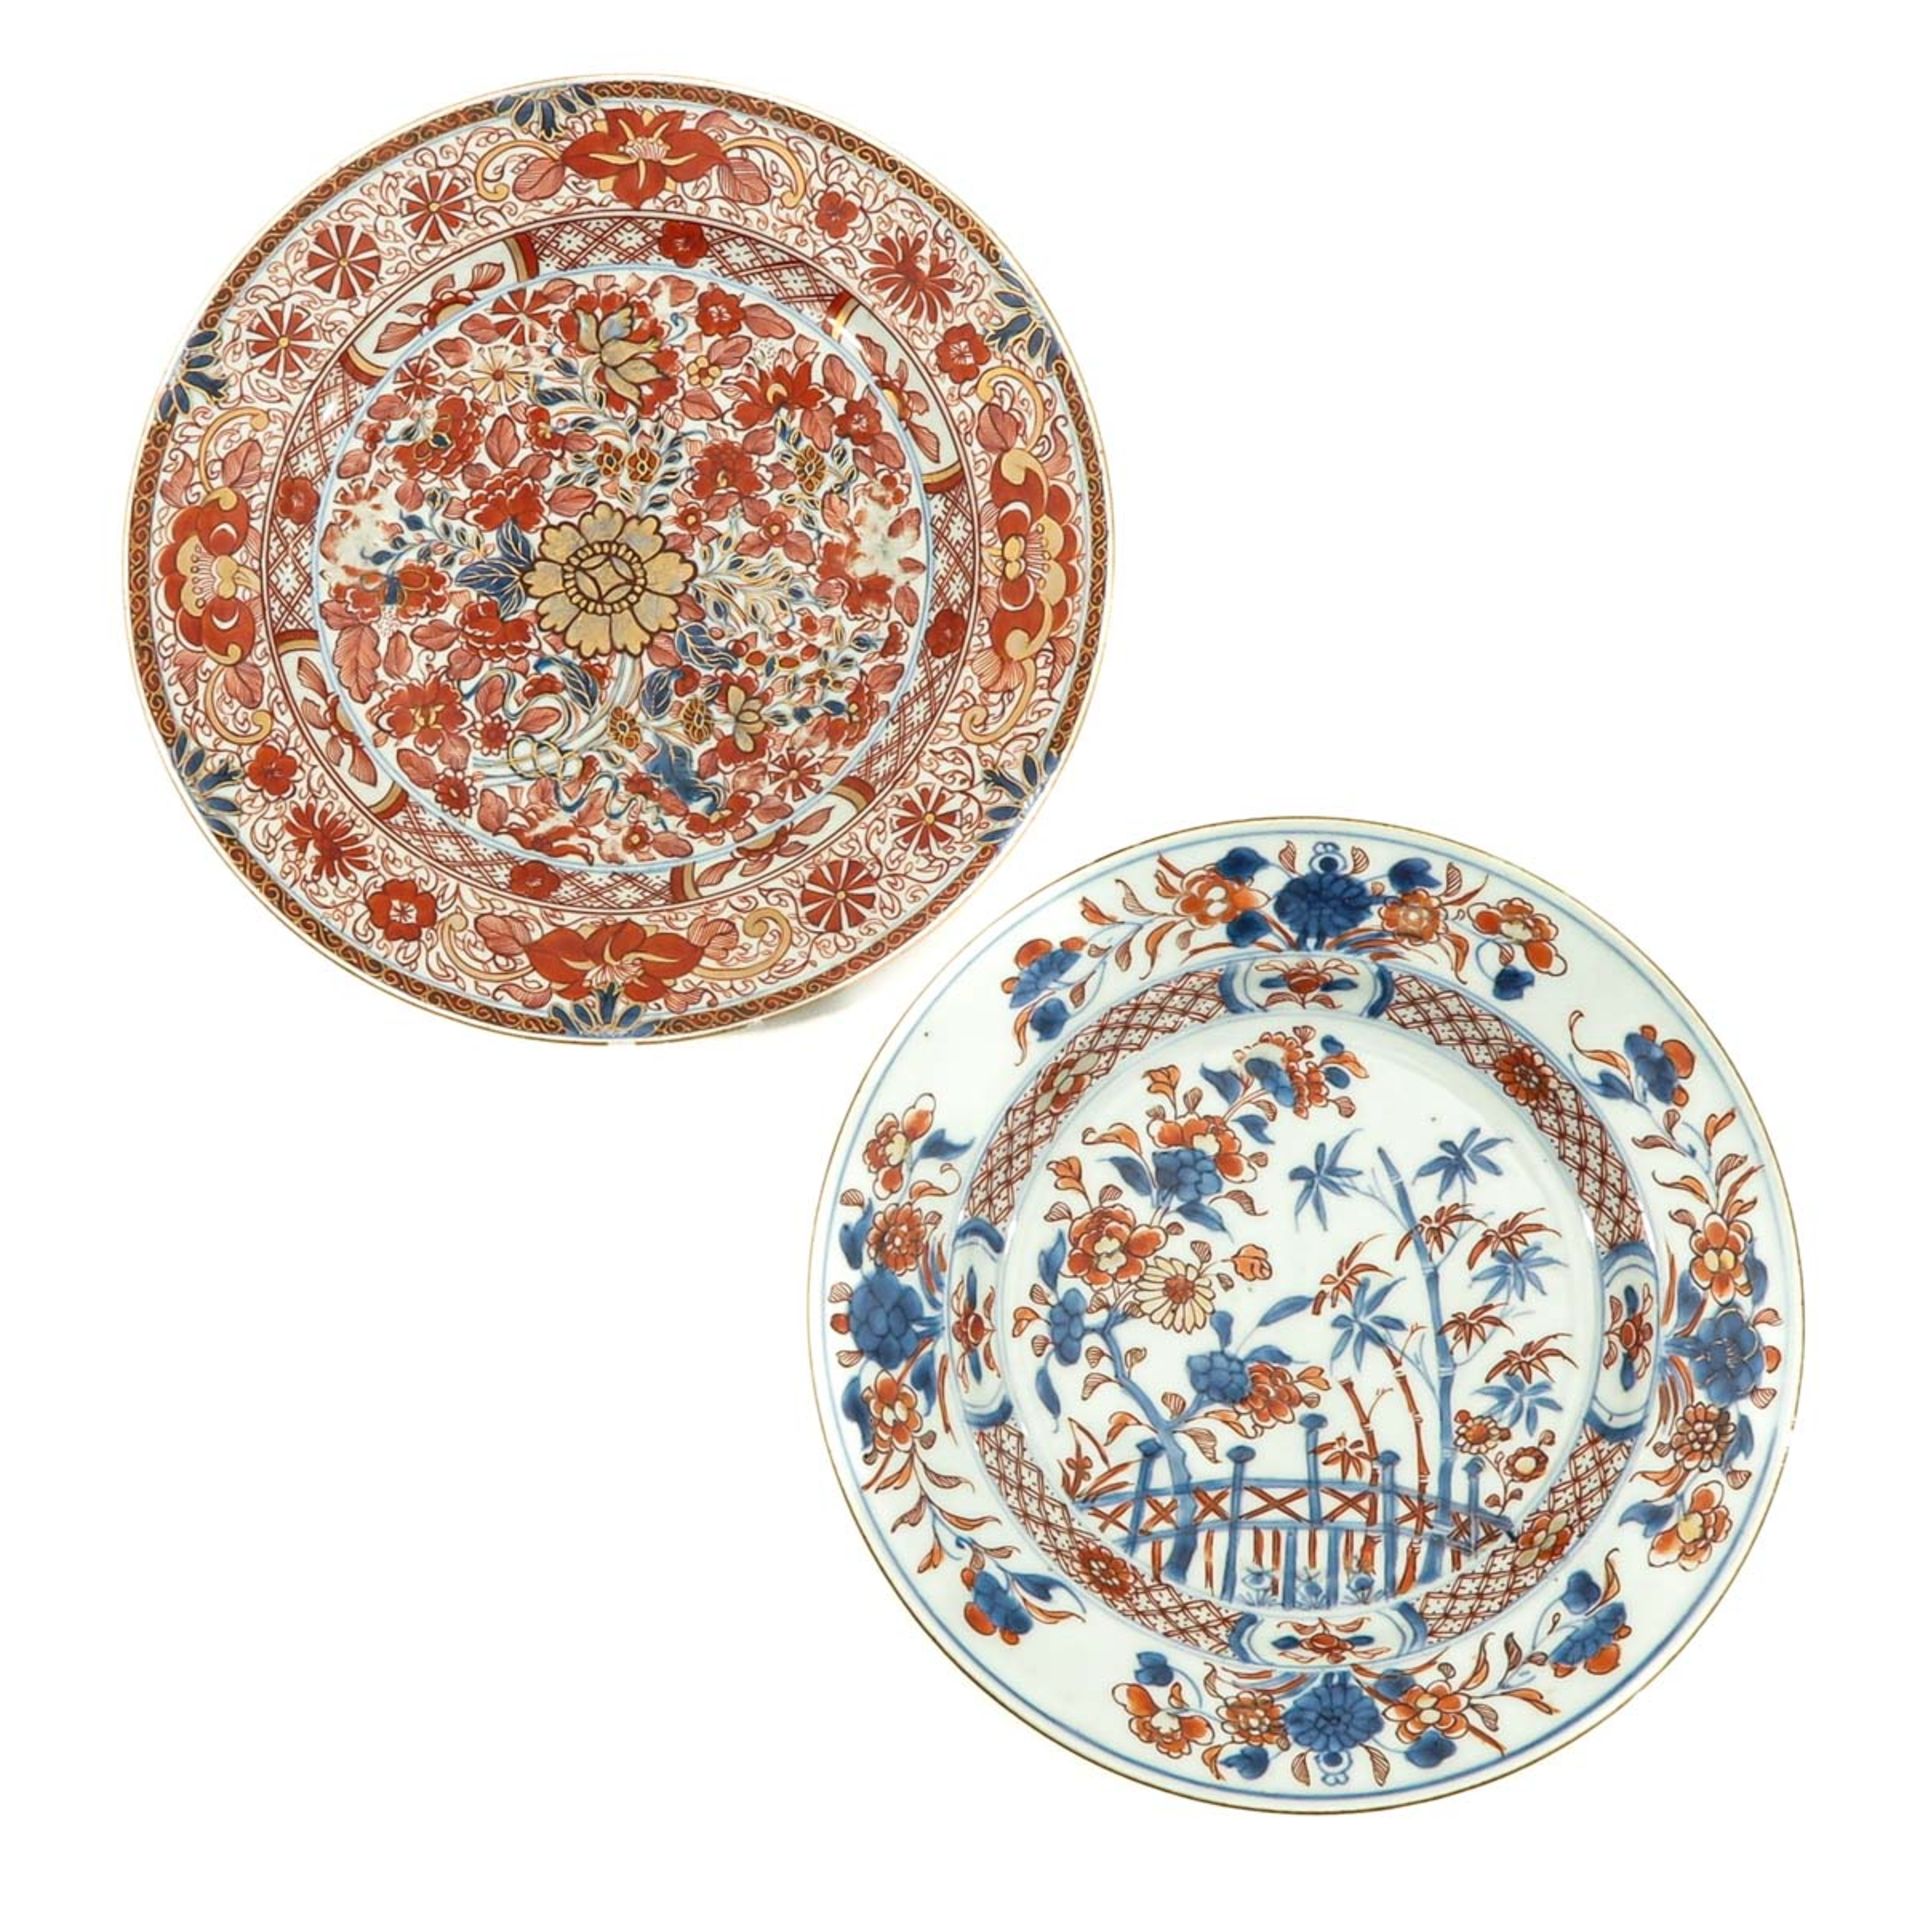 A Collection of 6 Imari Plates - Image 5 of 10